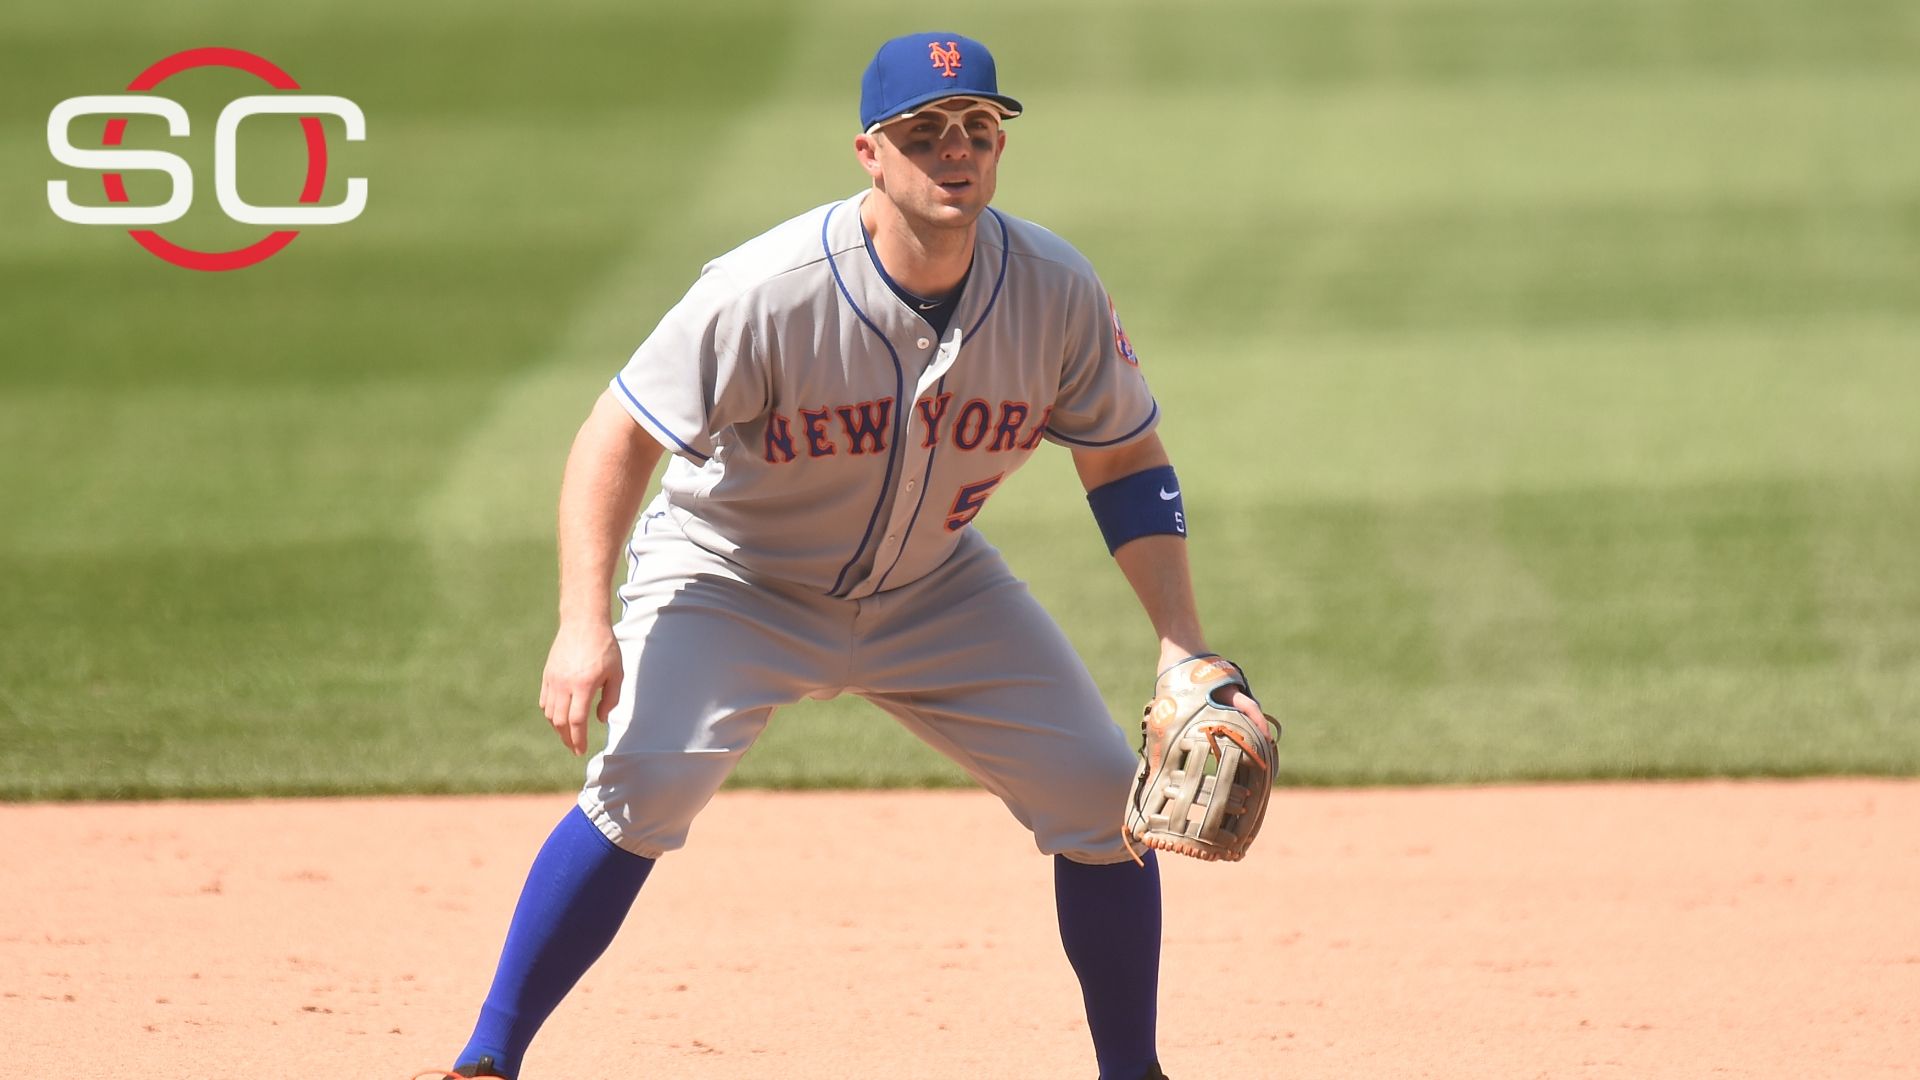 David Wright has surgery on herniated disk in neck - ABC13 Houston